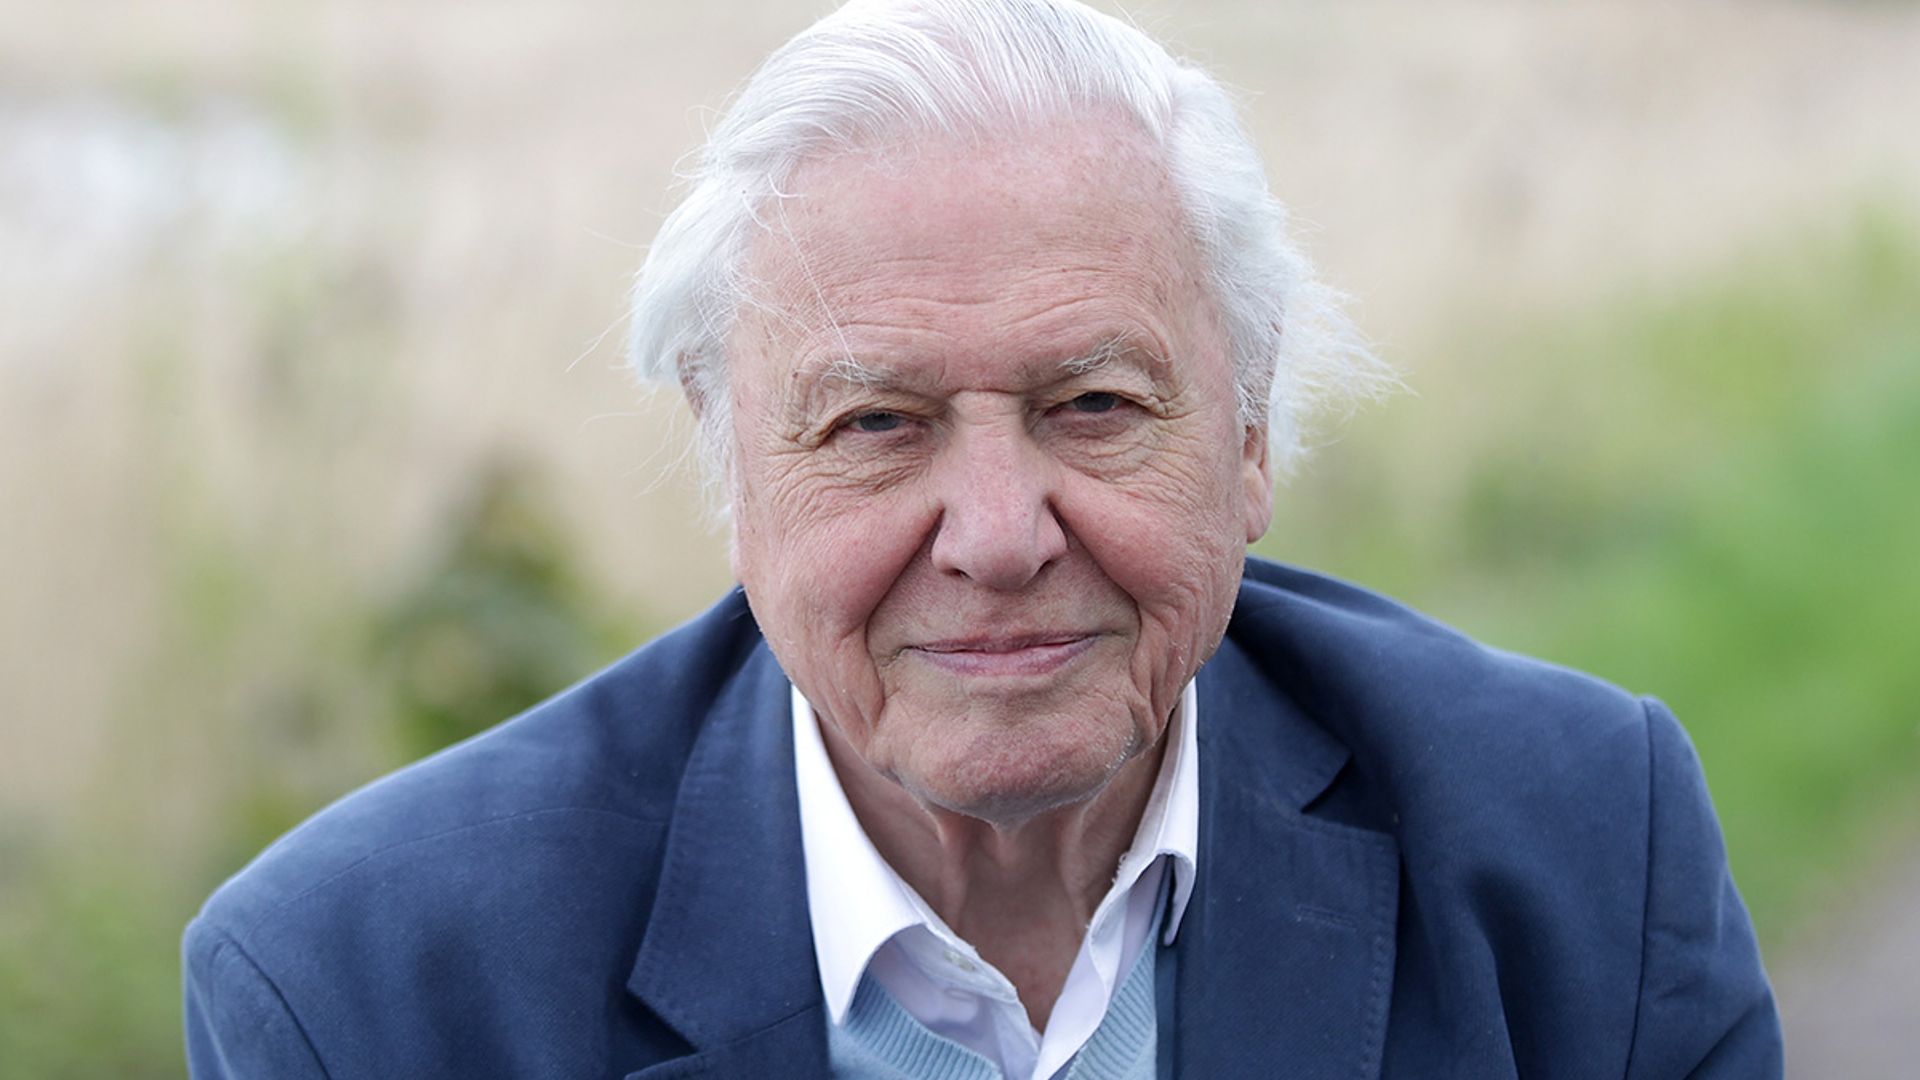 David Attenborough then vs now: take a look back at his early career